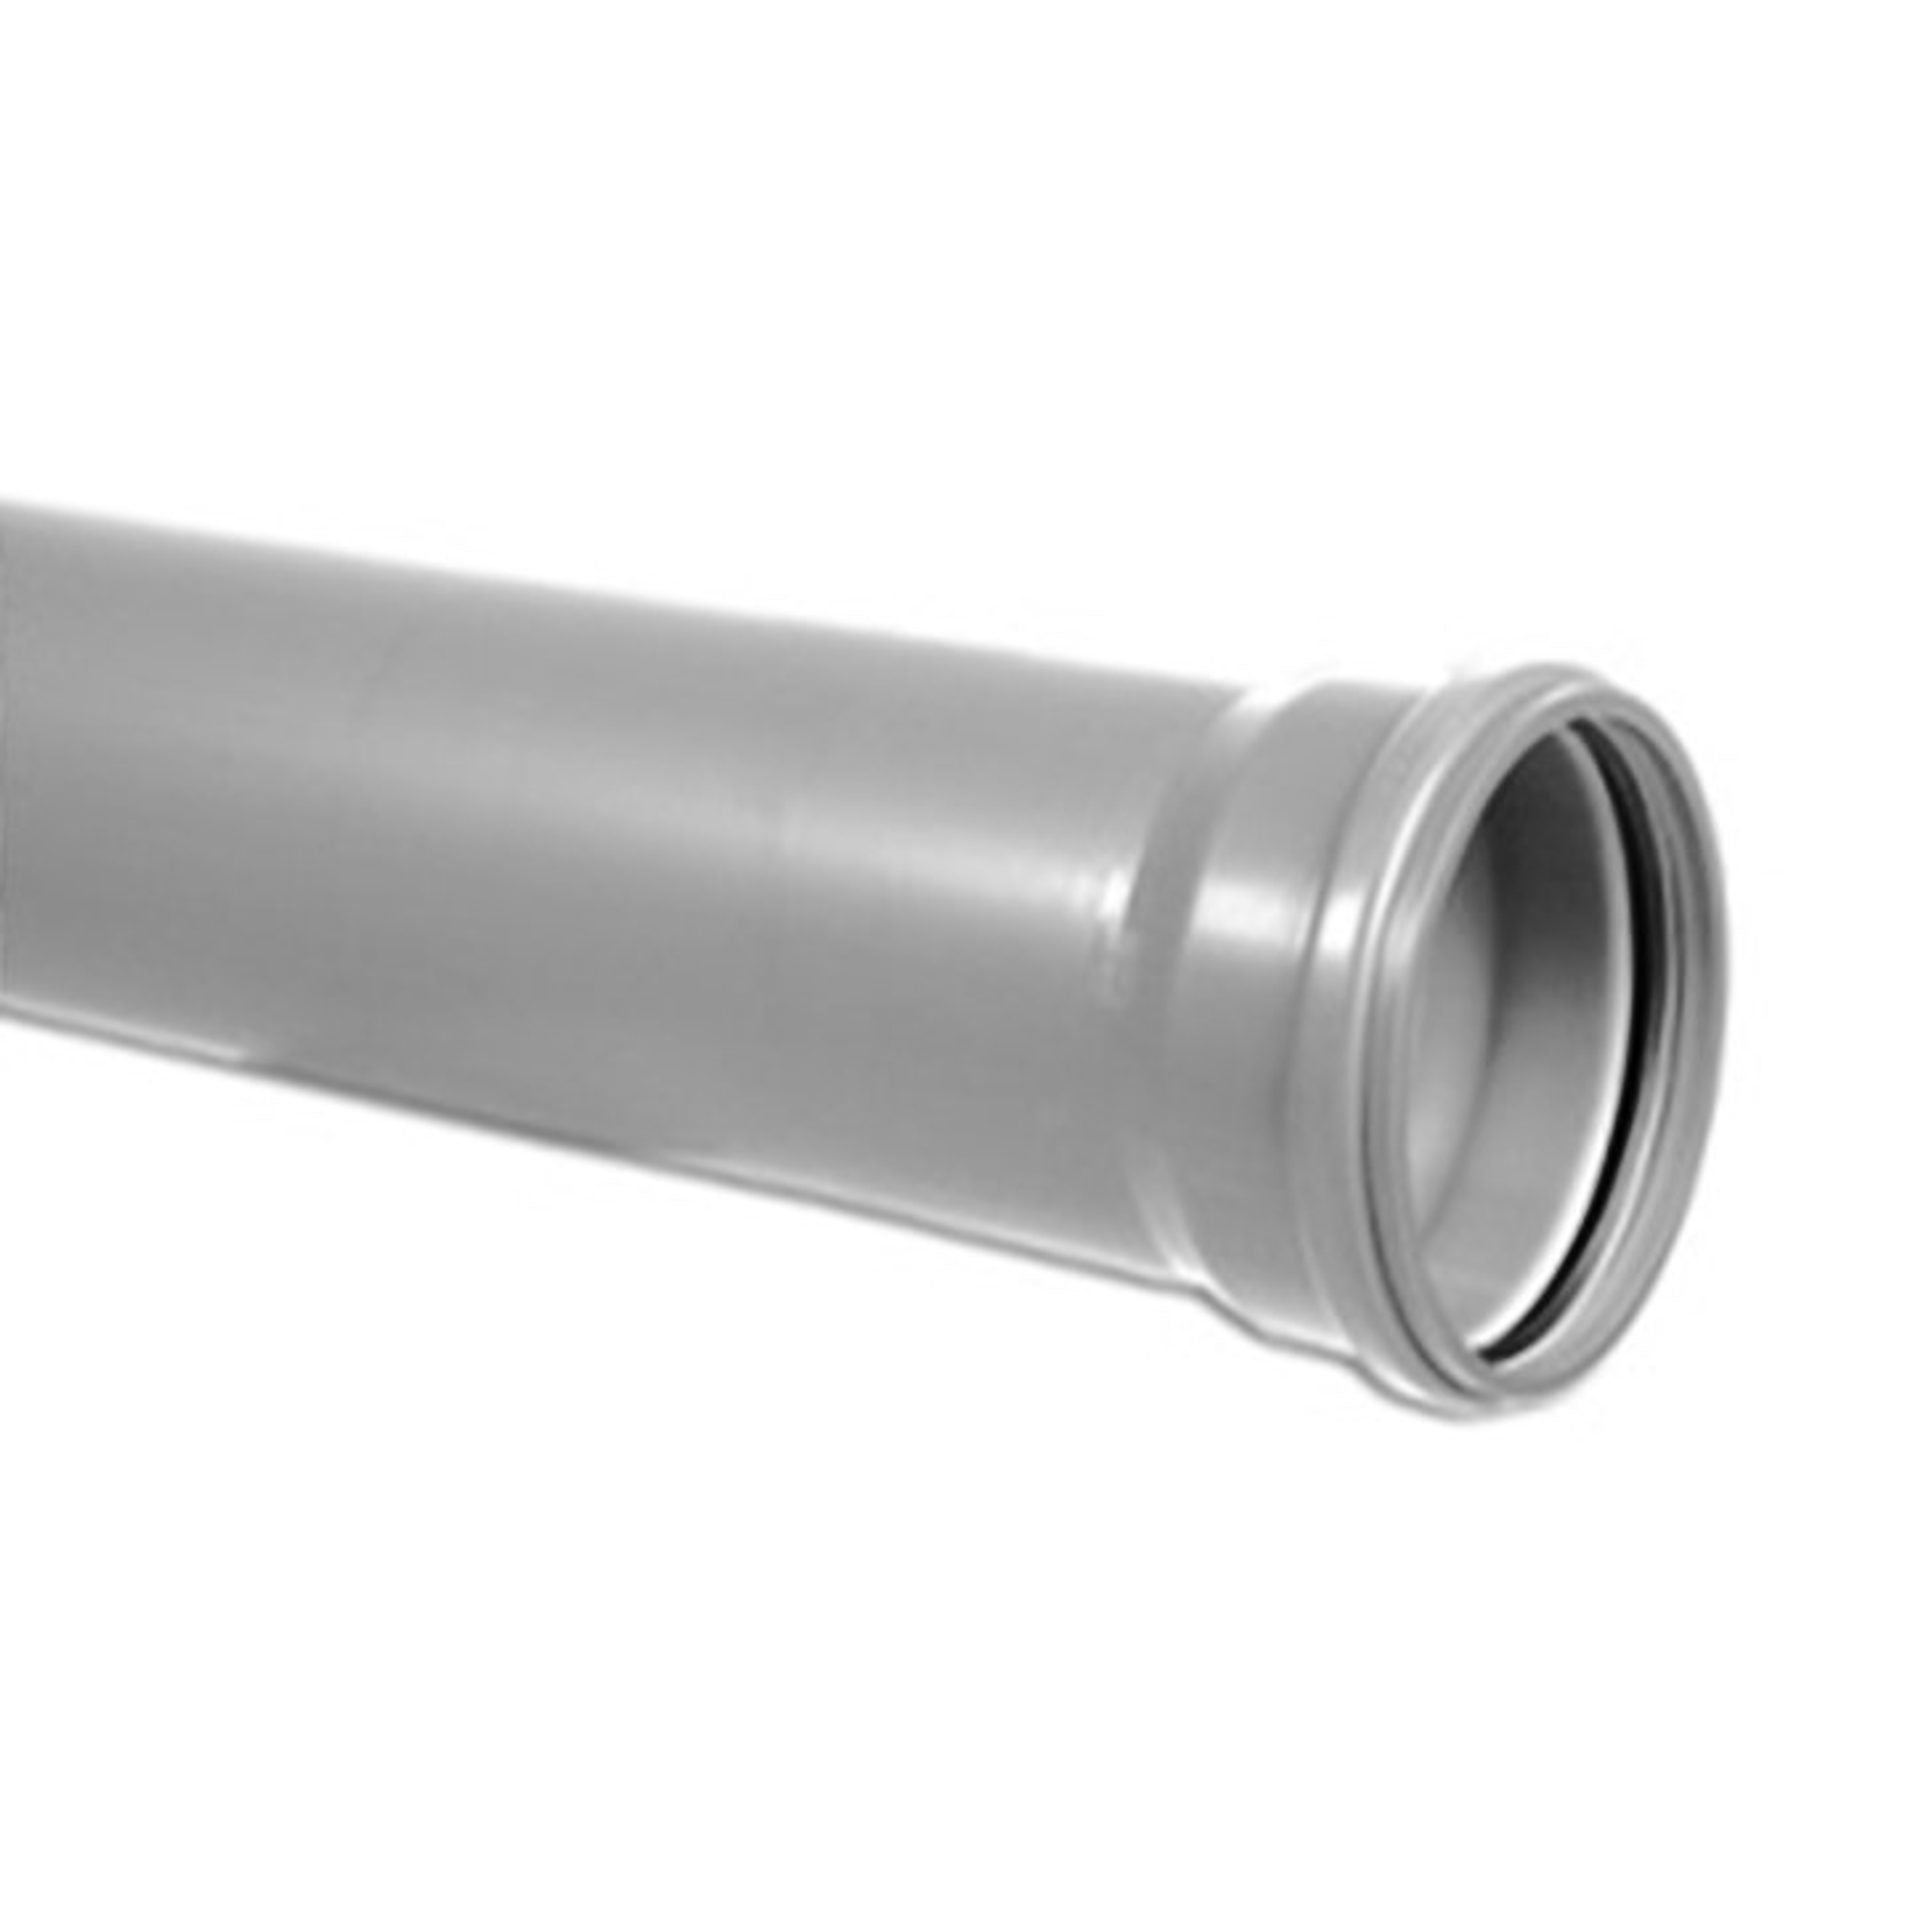 Pipe for Soil/waste systems Kaczmarek PP HT S14 Black with socket and TPE-seal 75 x 2,6 x 3000 mm